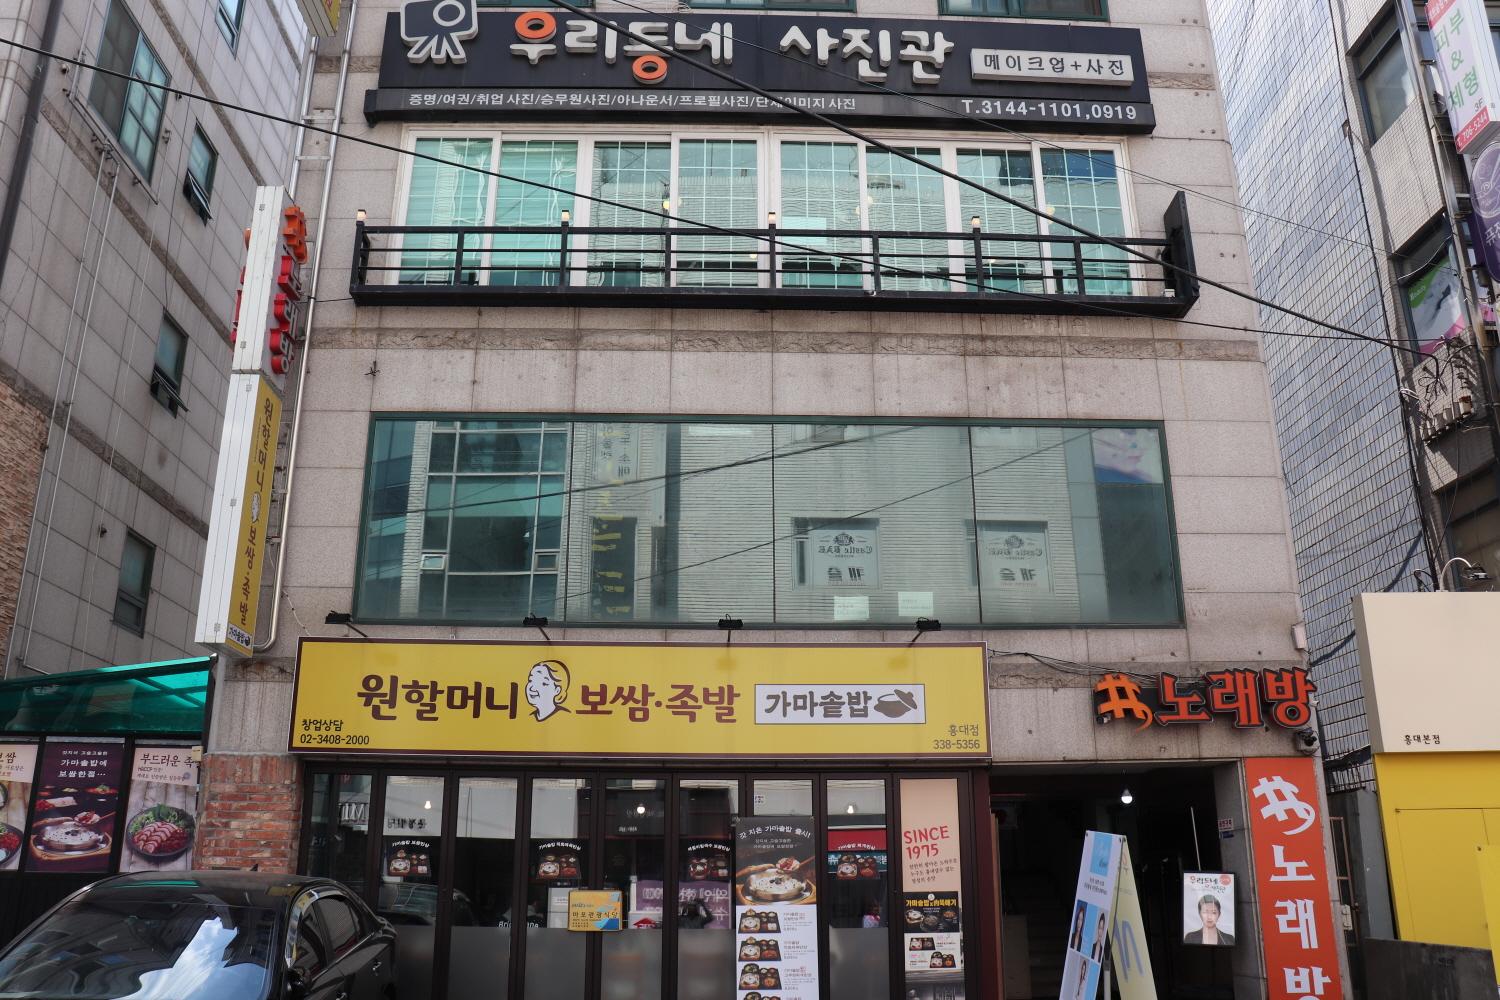 Exterior of Our Neighborhood Photo Studio in Hongdae, Seoul: A Commercial Building with Mixed-Use, Featuring a City-Facing Facade and Windows.